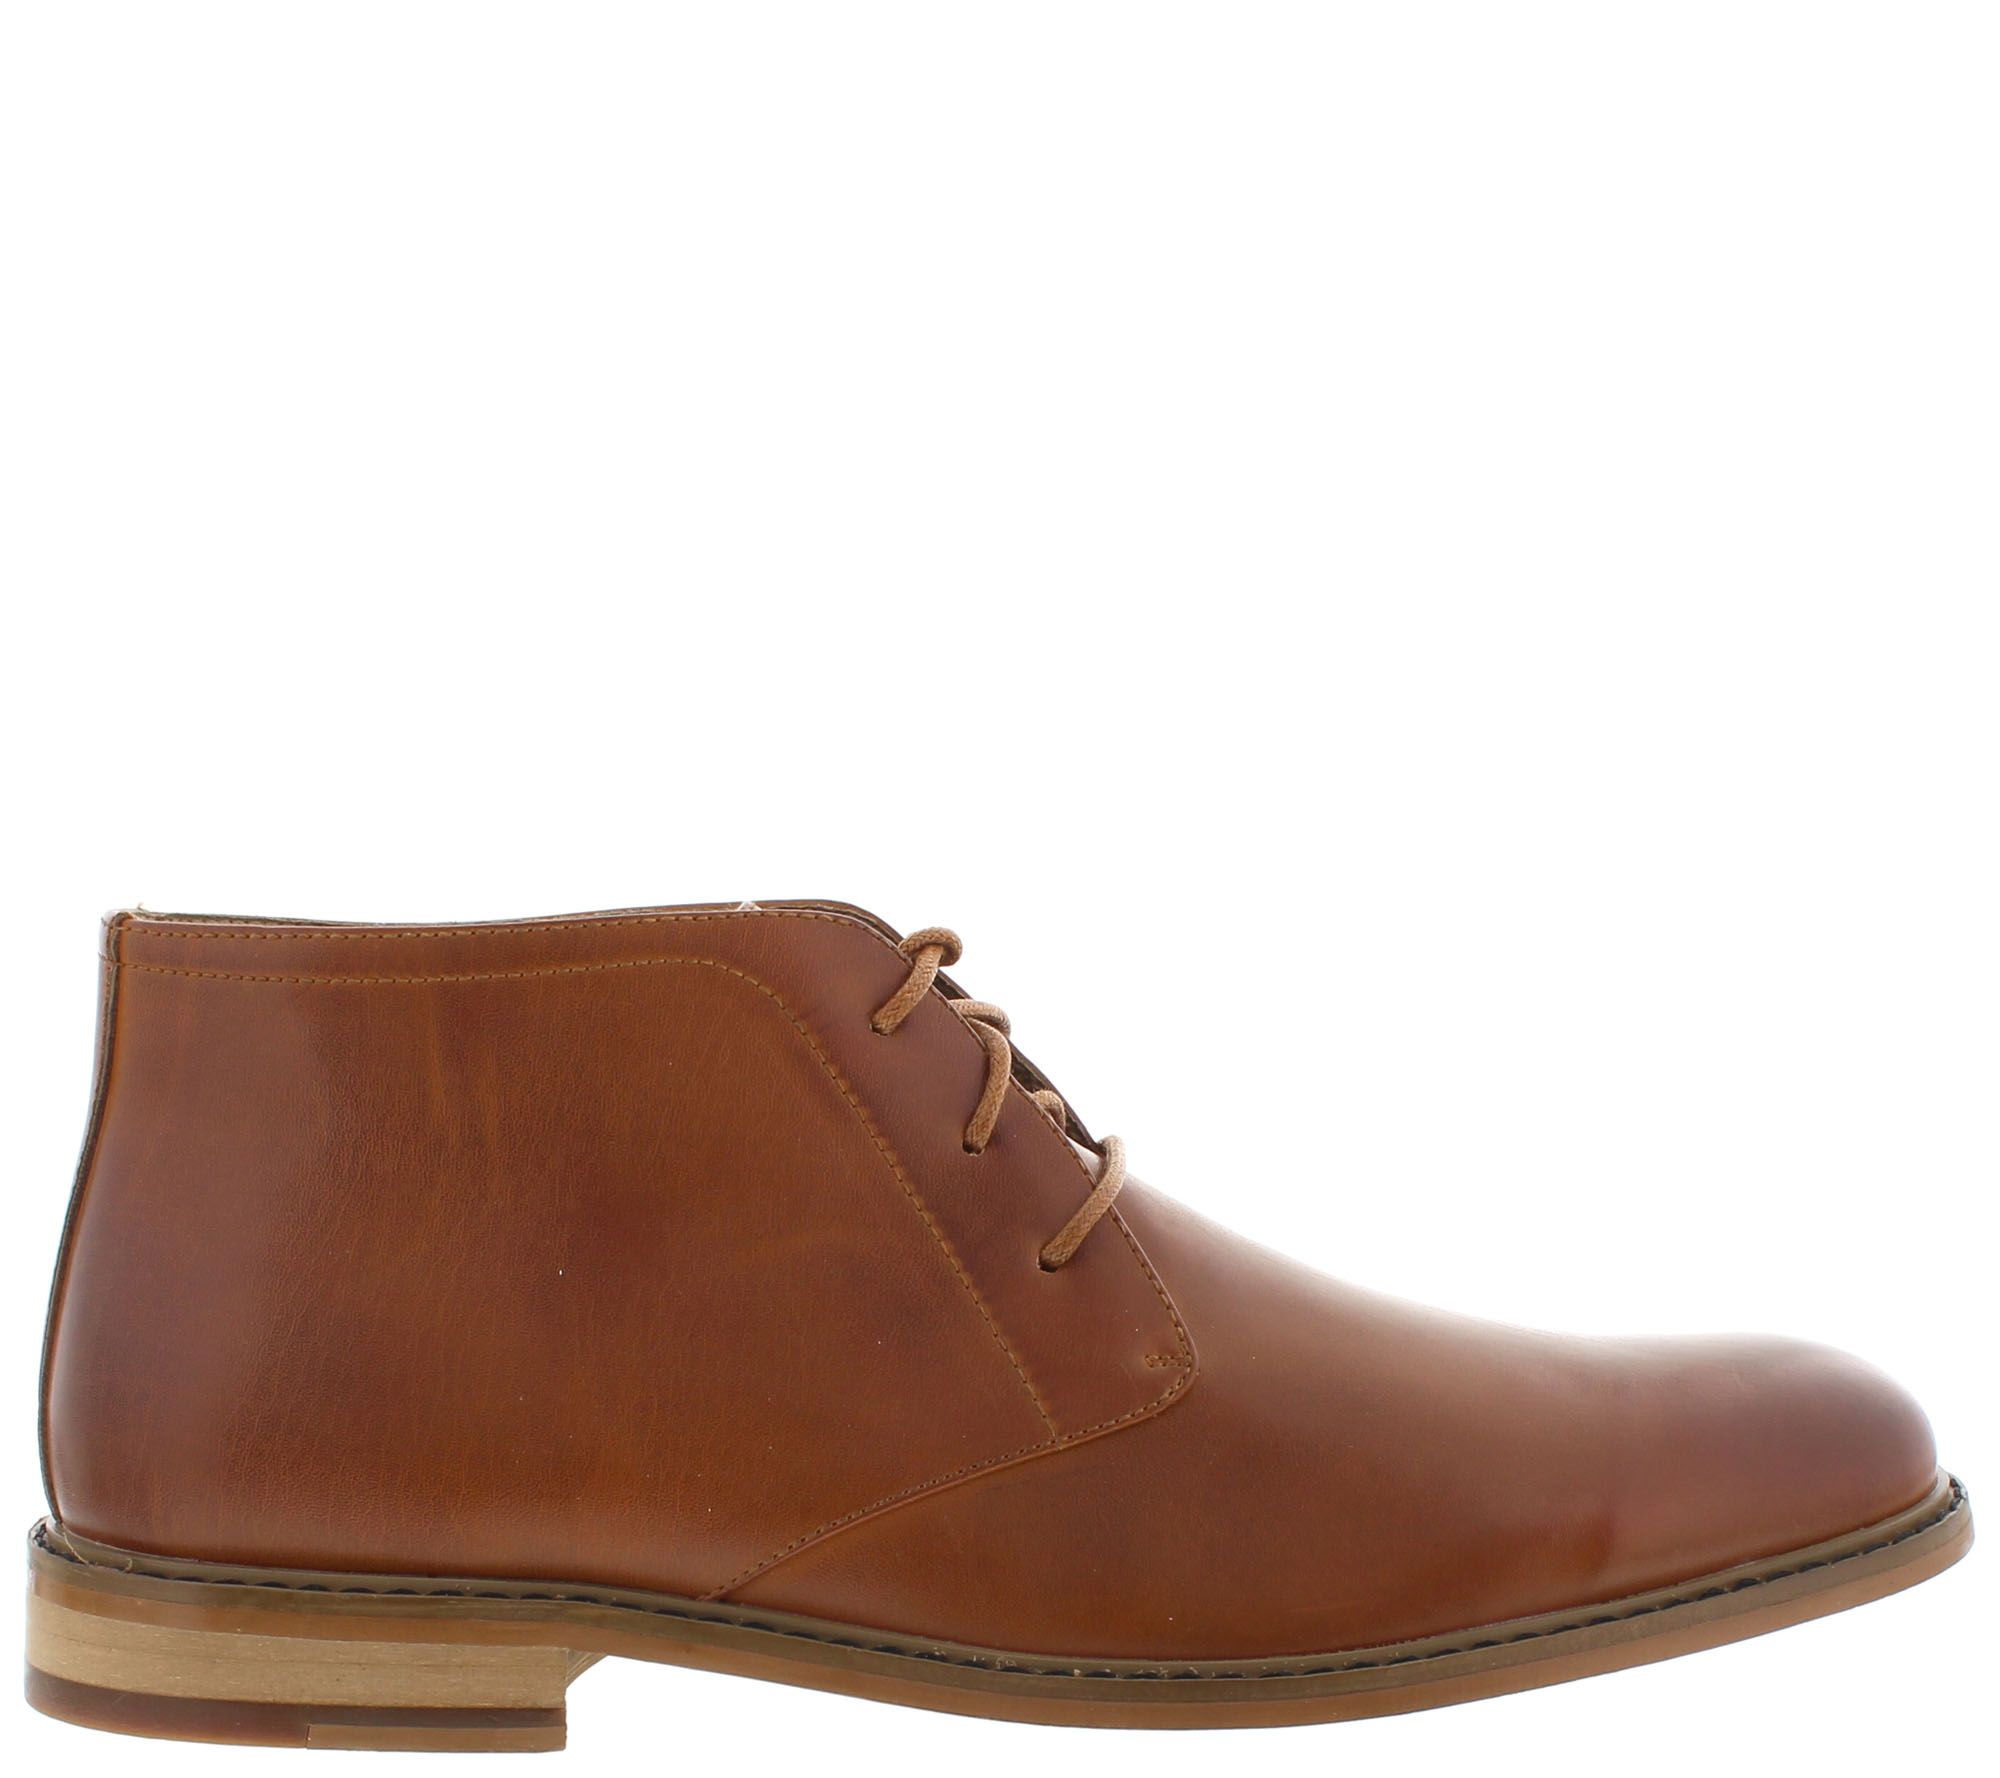 Deer Stags Men's Classic Lace-Up Chukka Boots -Seattle - QVC.com